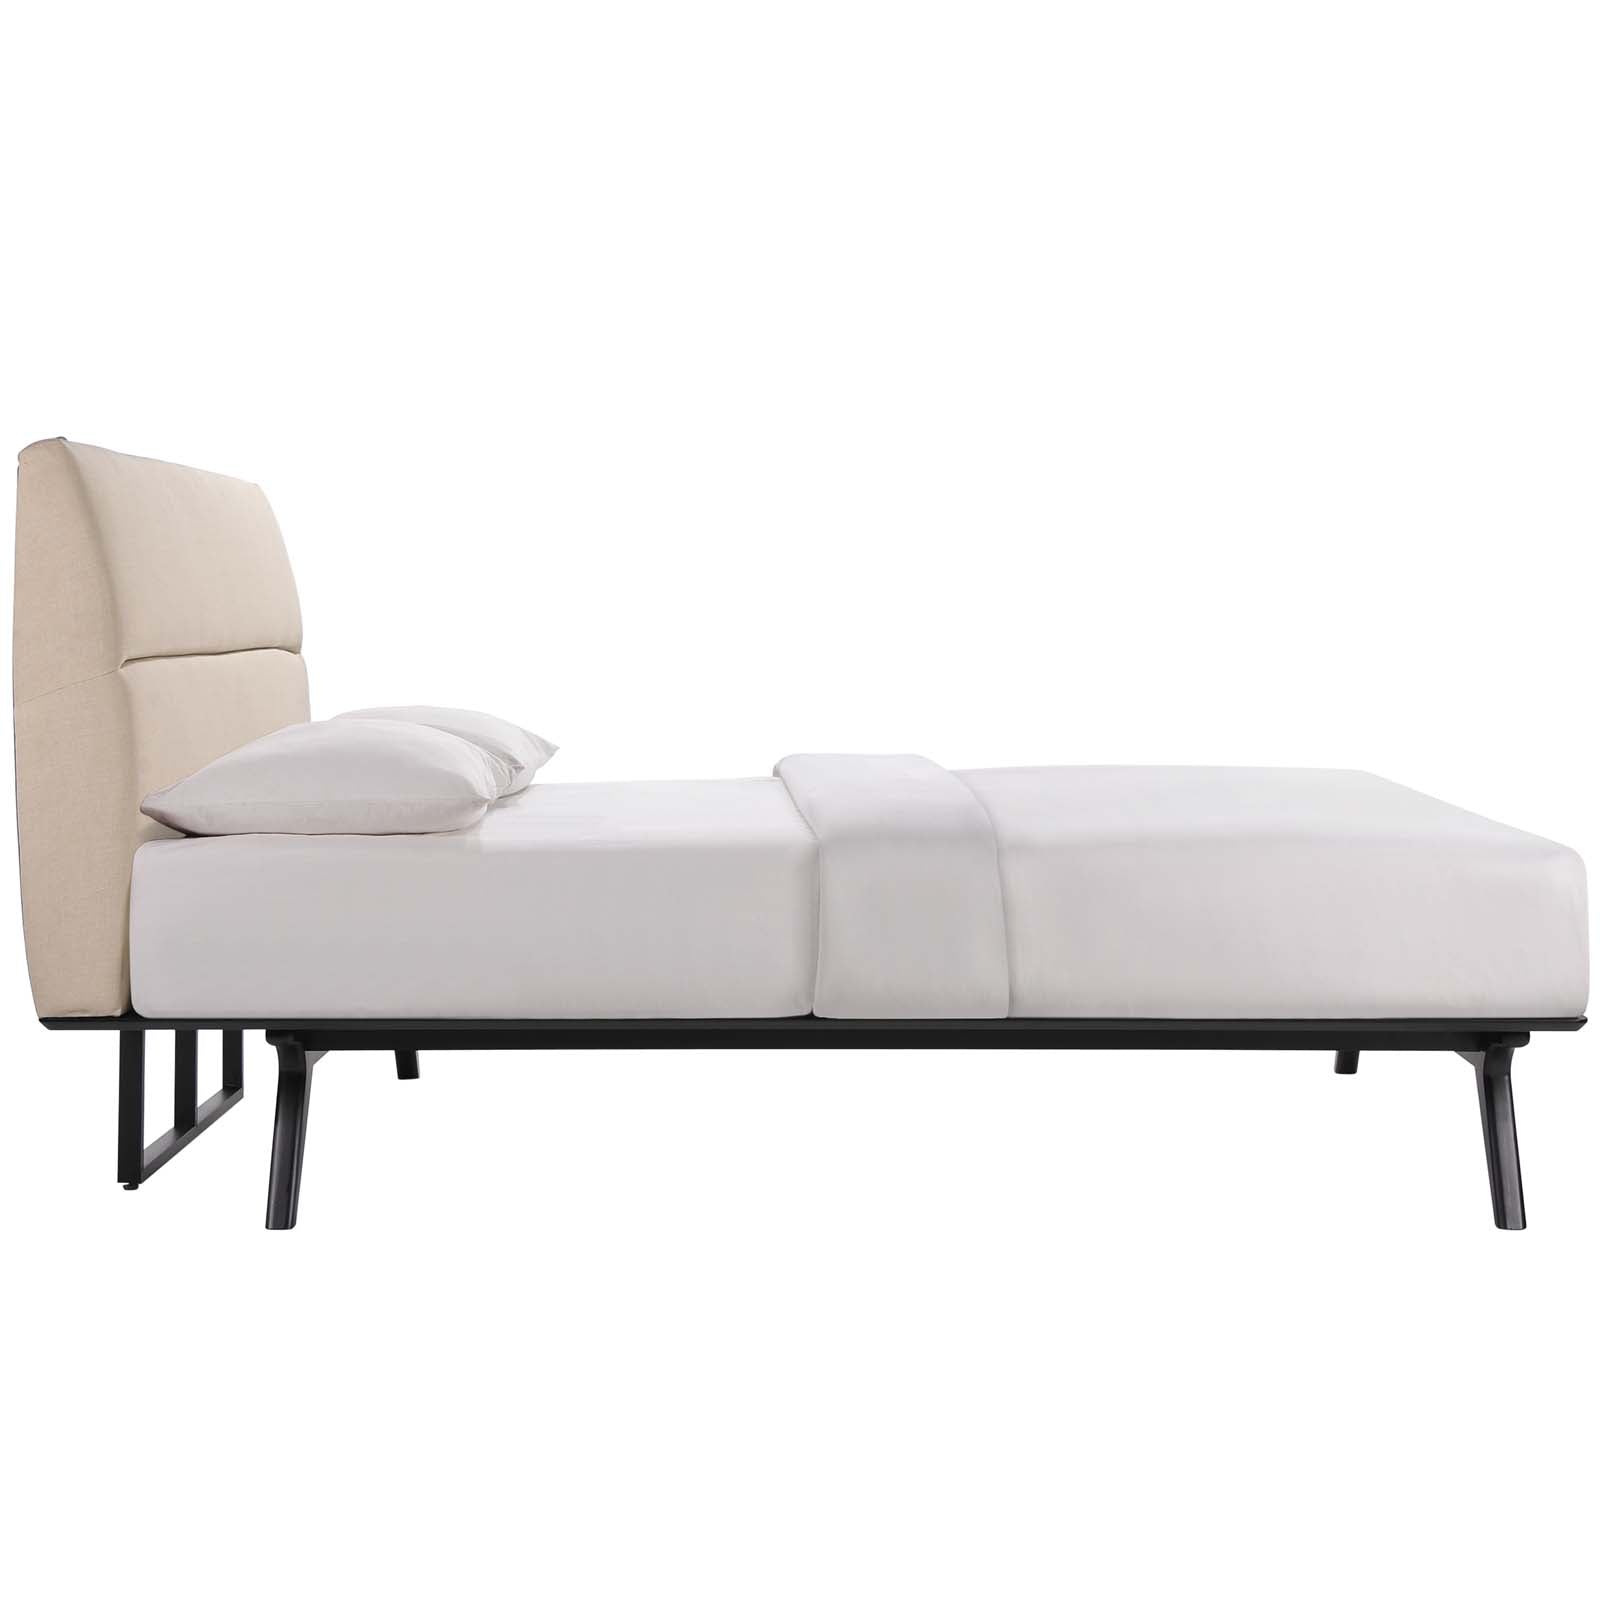 Addison Queen size - East Shore Modern Home Furnishings